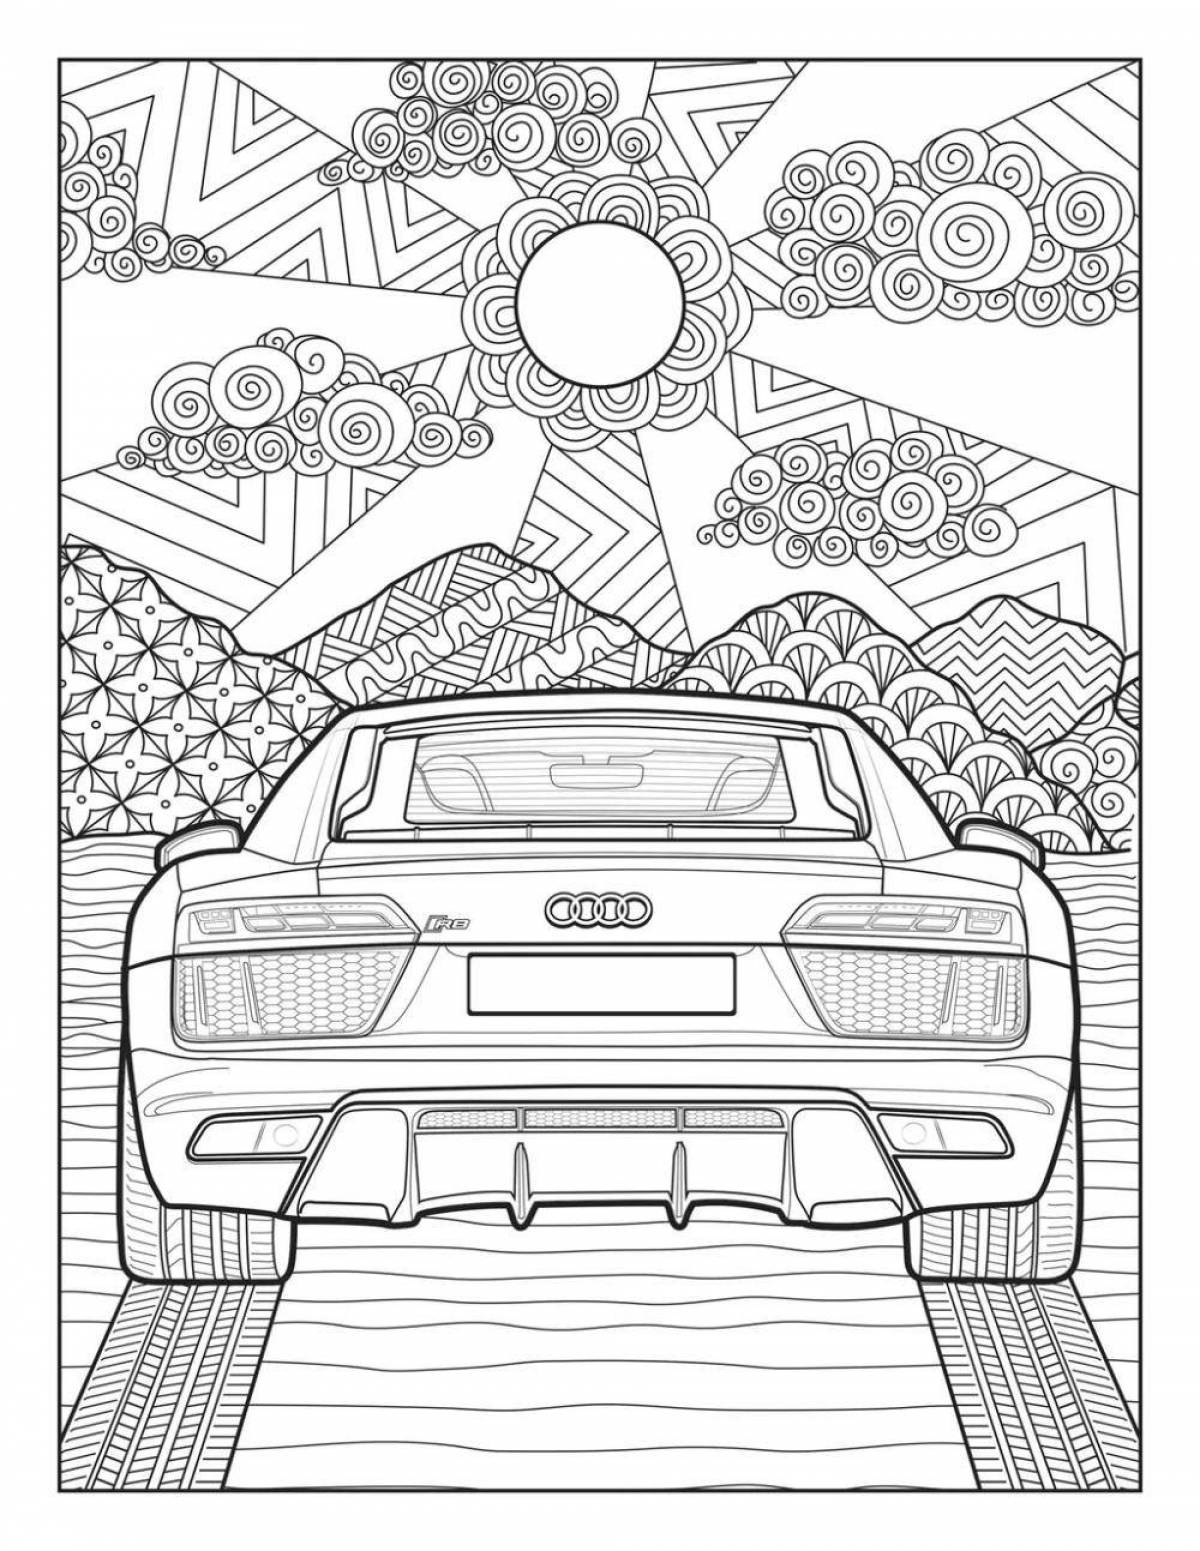 Fun antistress coloring book with cars